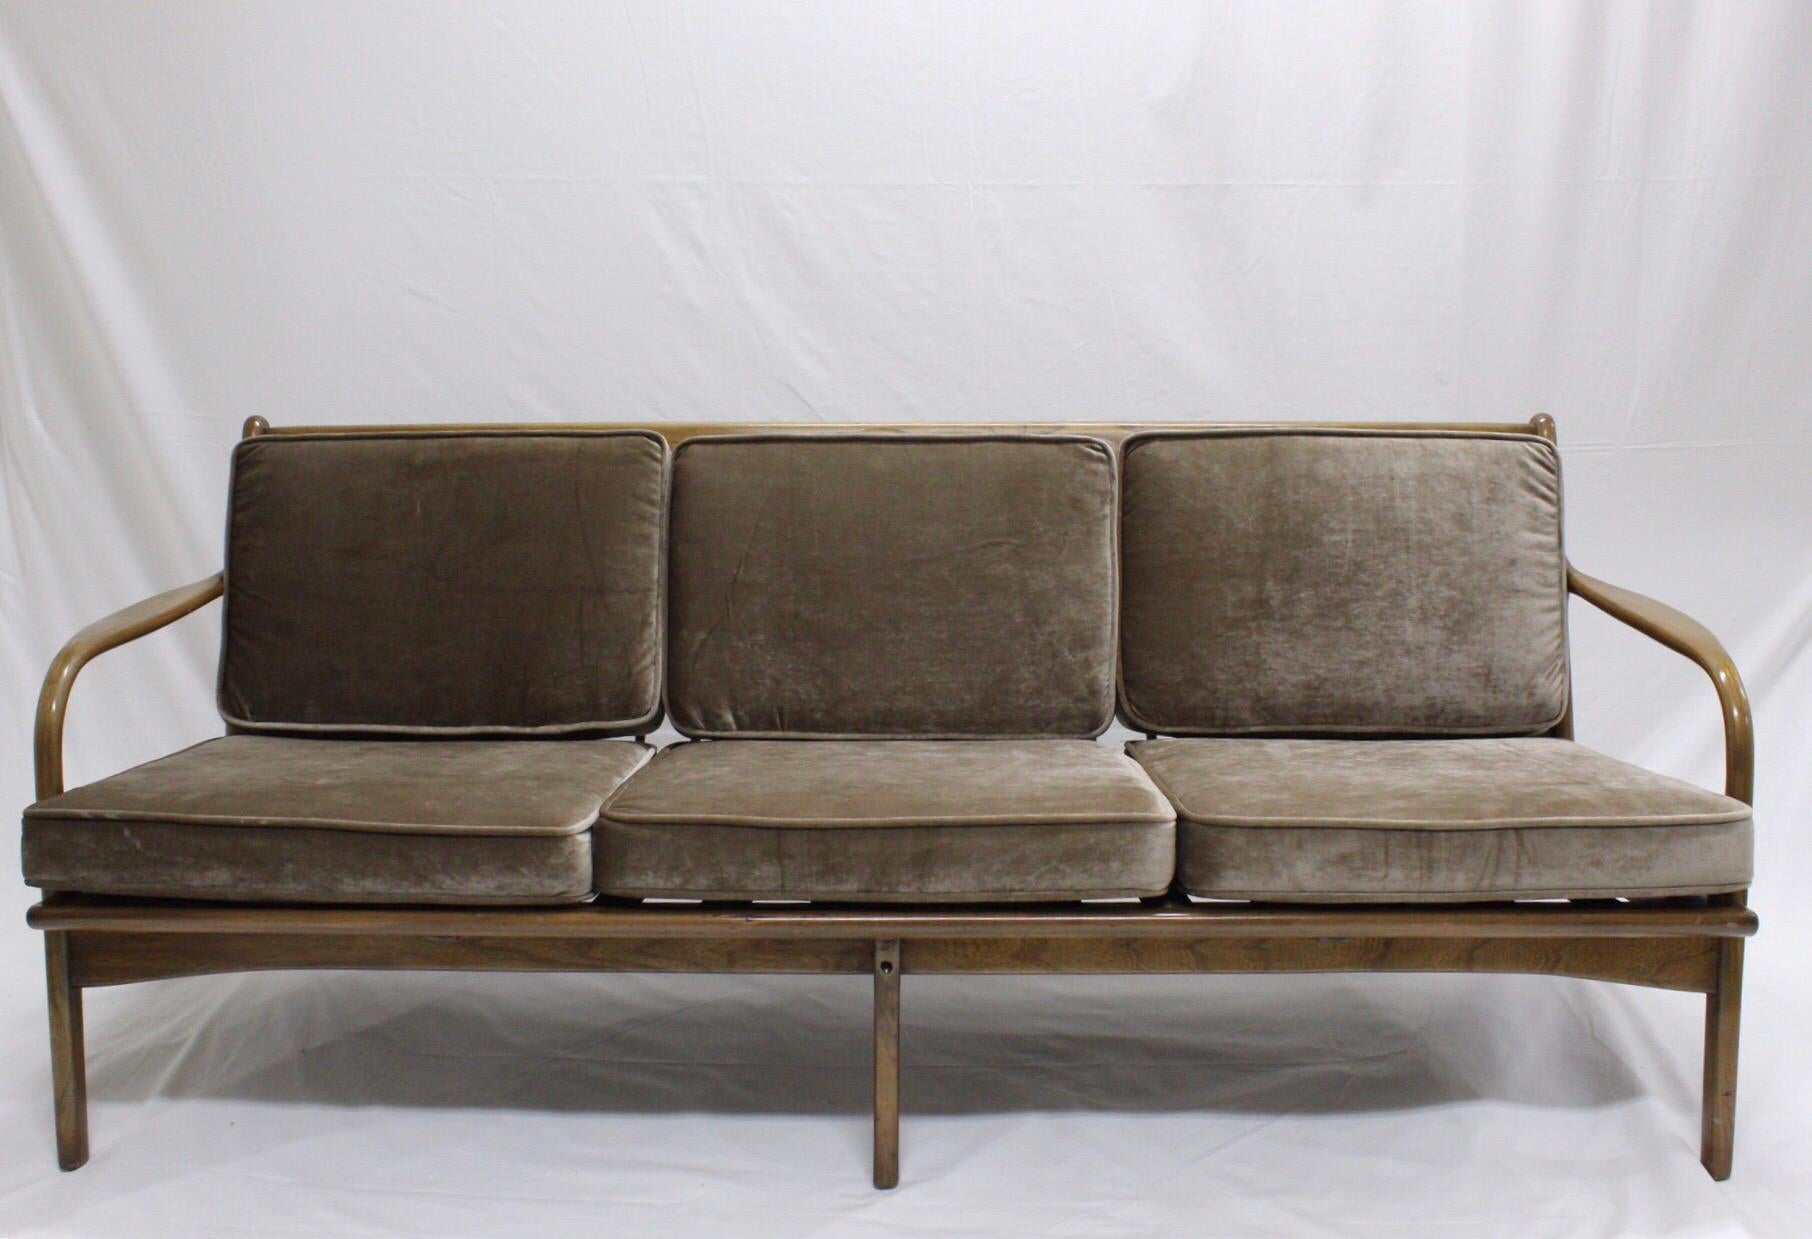 We present you this exquisite Sofa of the extinct furniture factory 